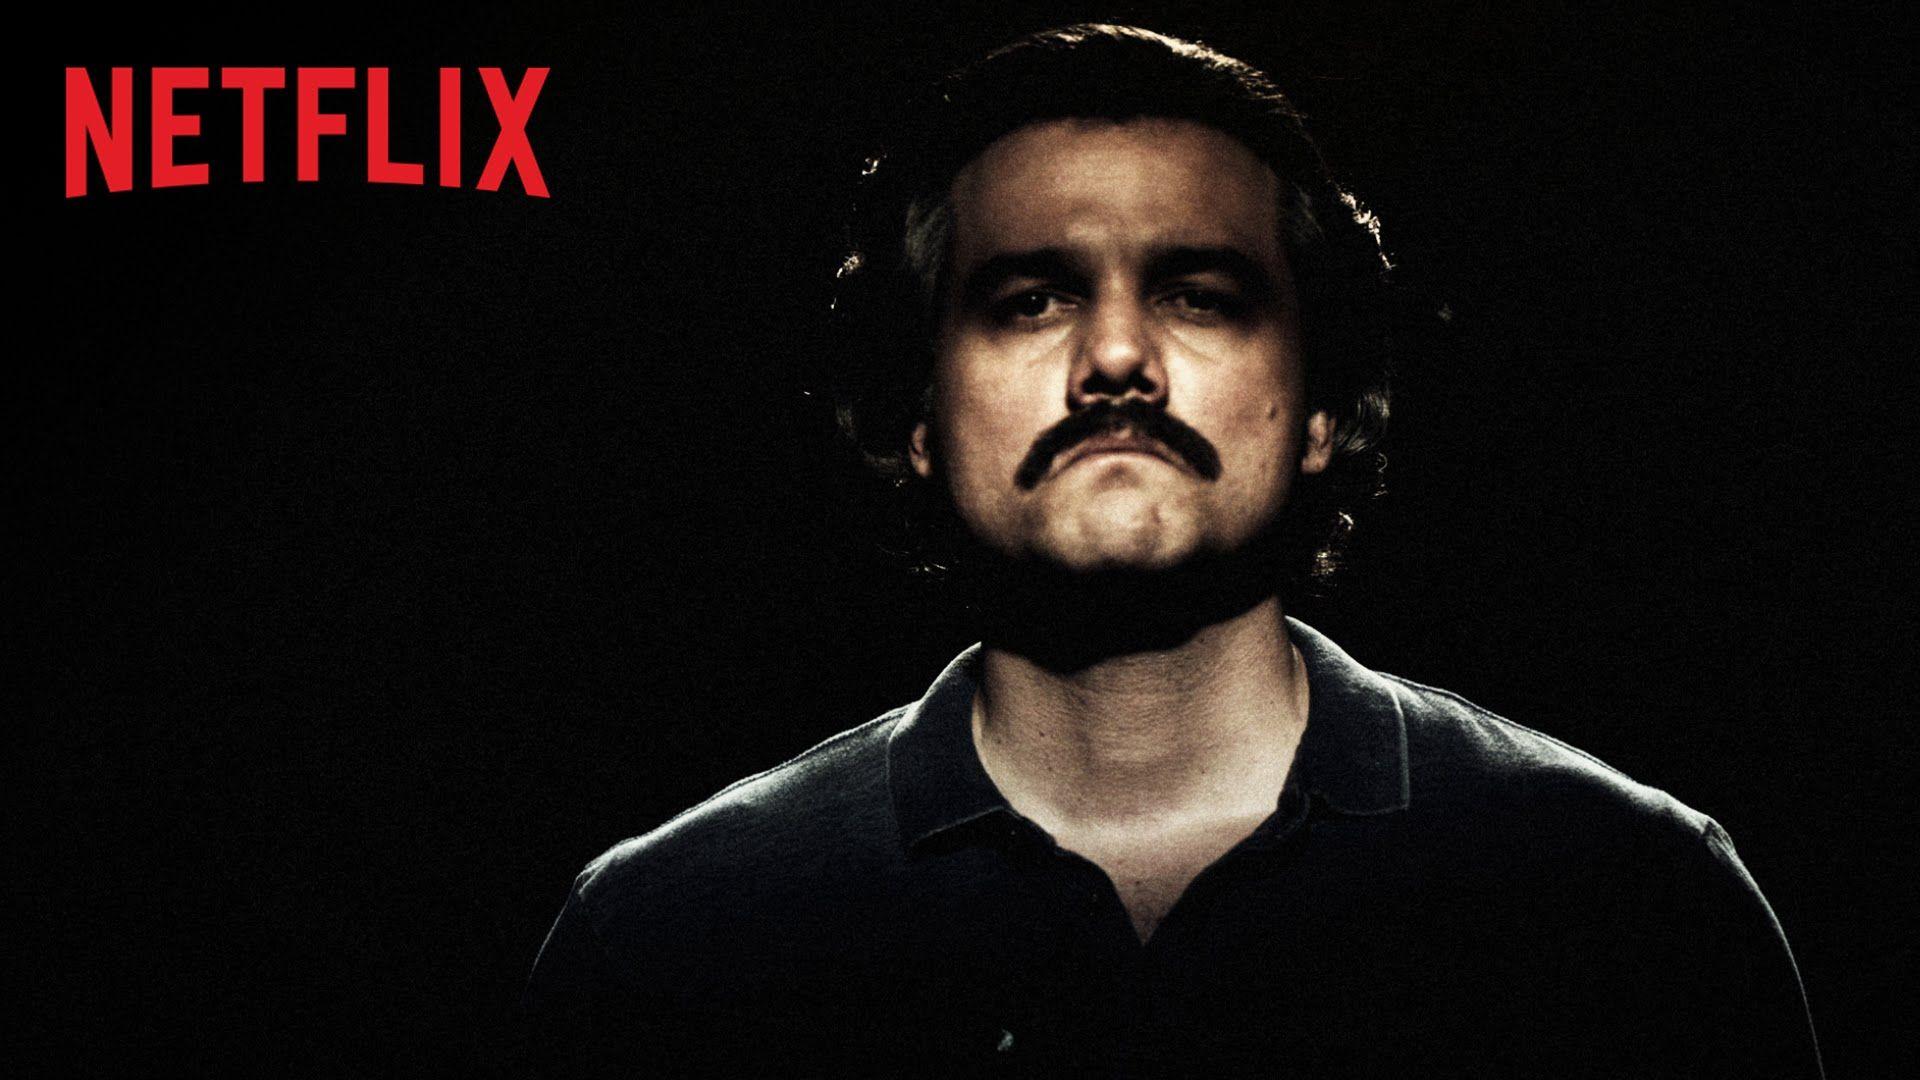 New image for Pablo Escobar & Related Suggestions